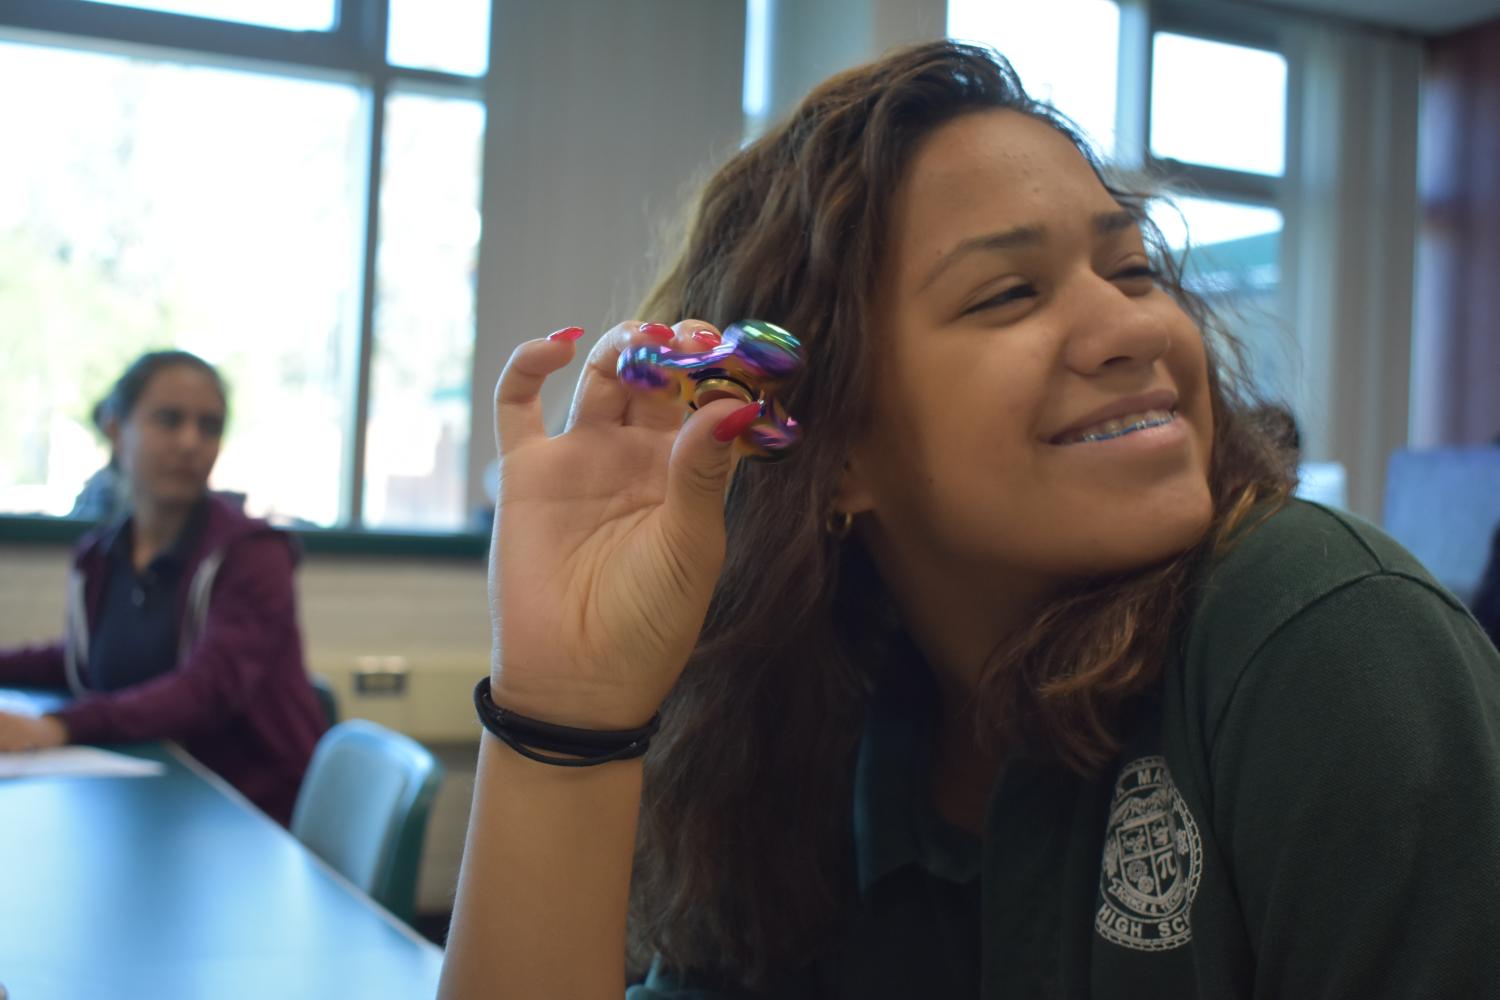 Sophomore Sofia Nunez enjoys using a fidget spinner and says that it helps her concentrate in class.